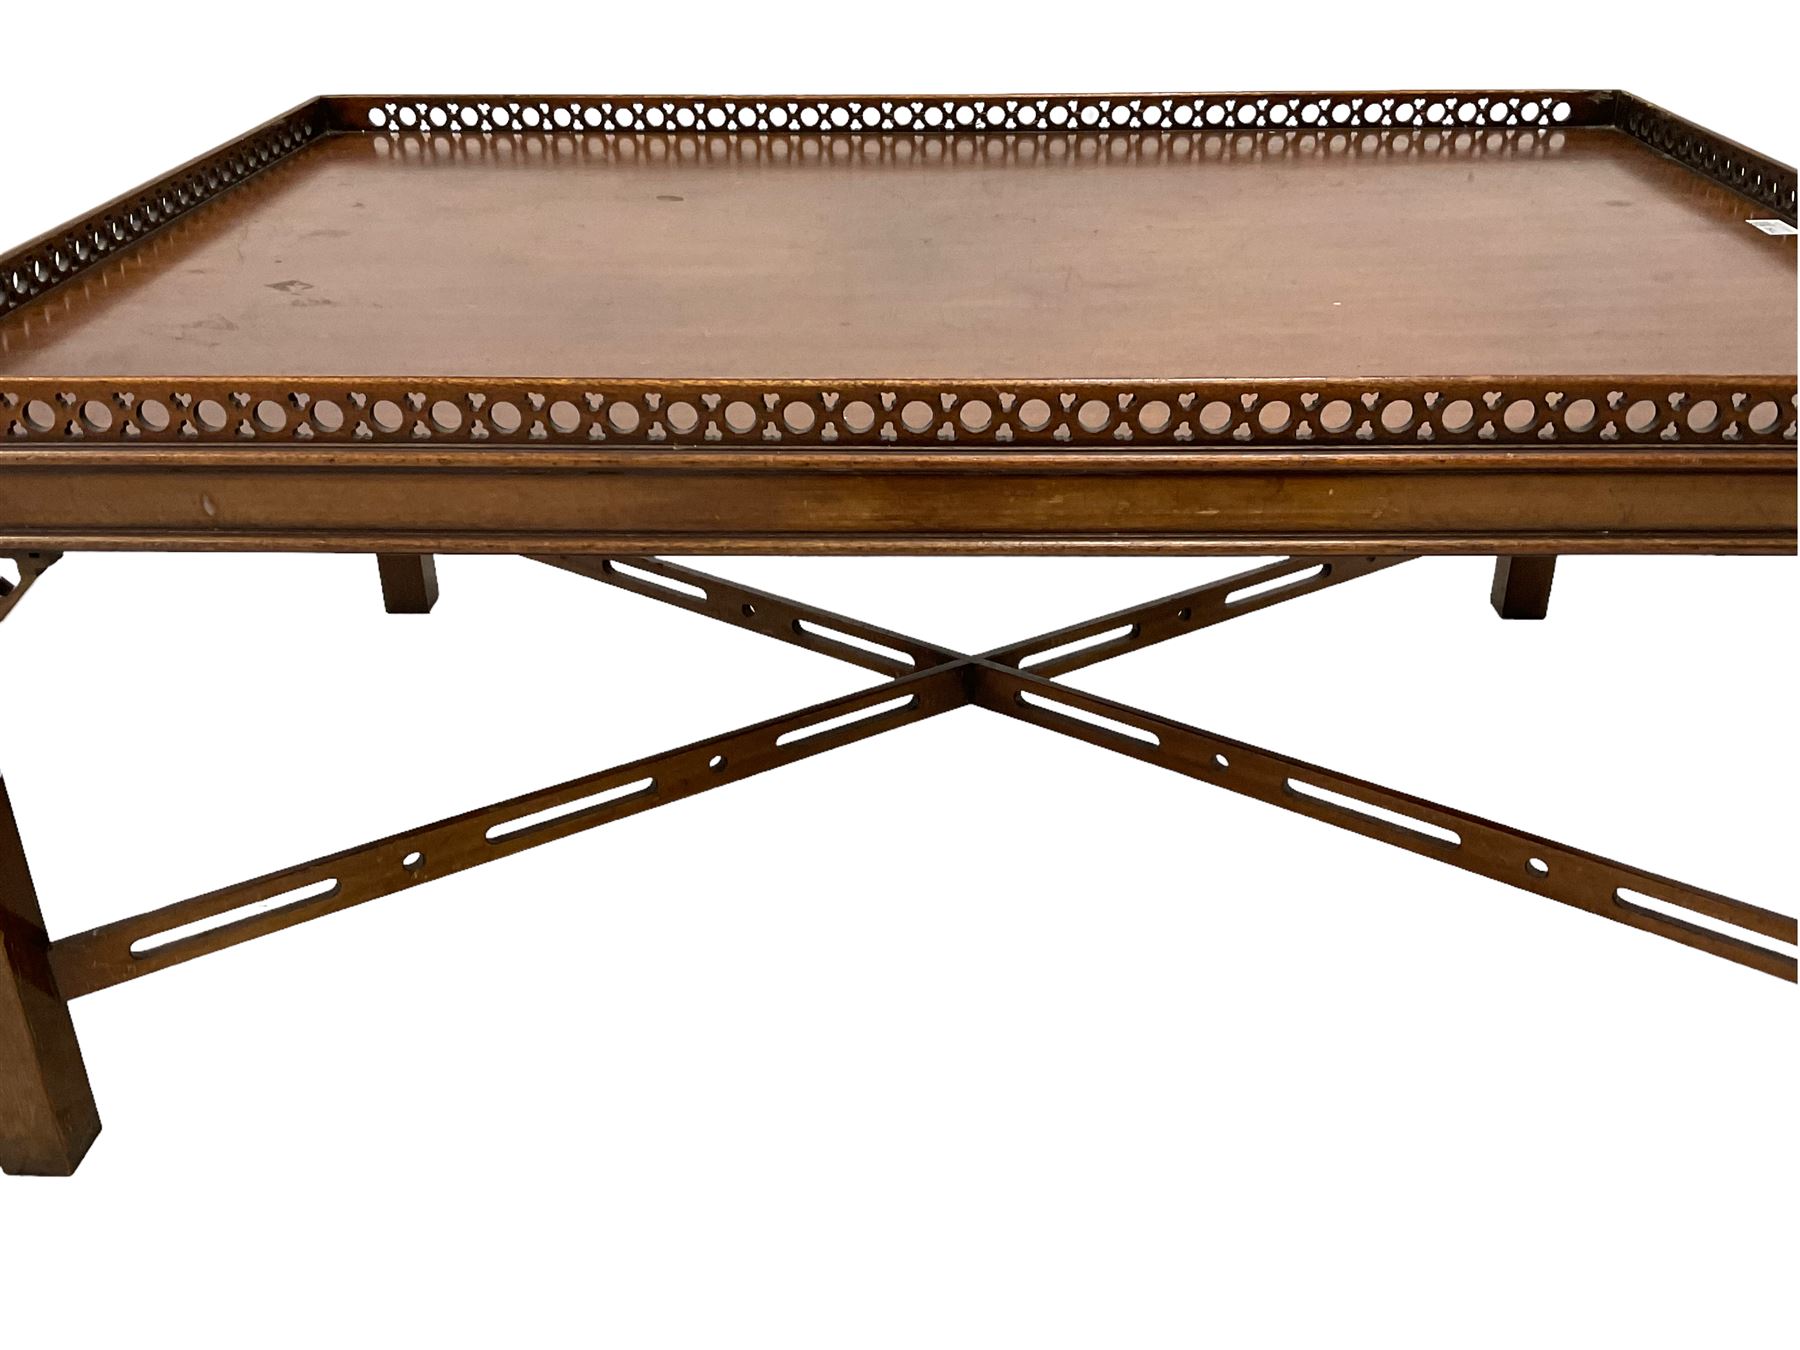 Chippendale design mahogany coffee table - Image 2 of 4